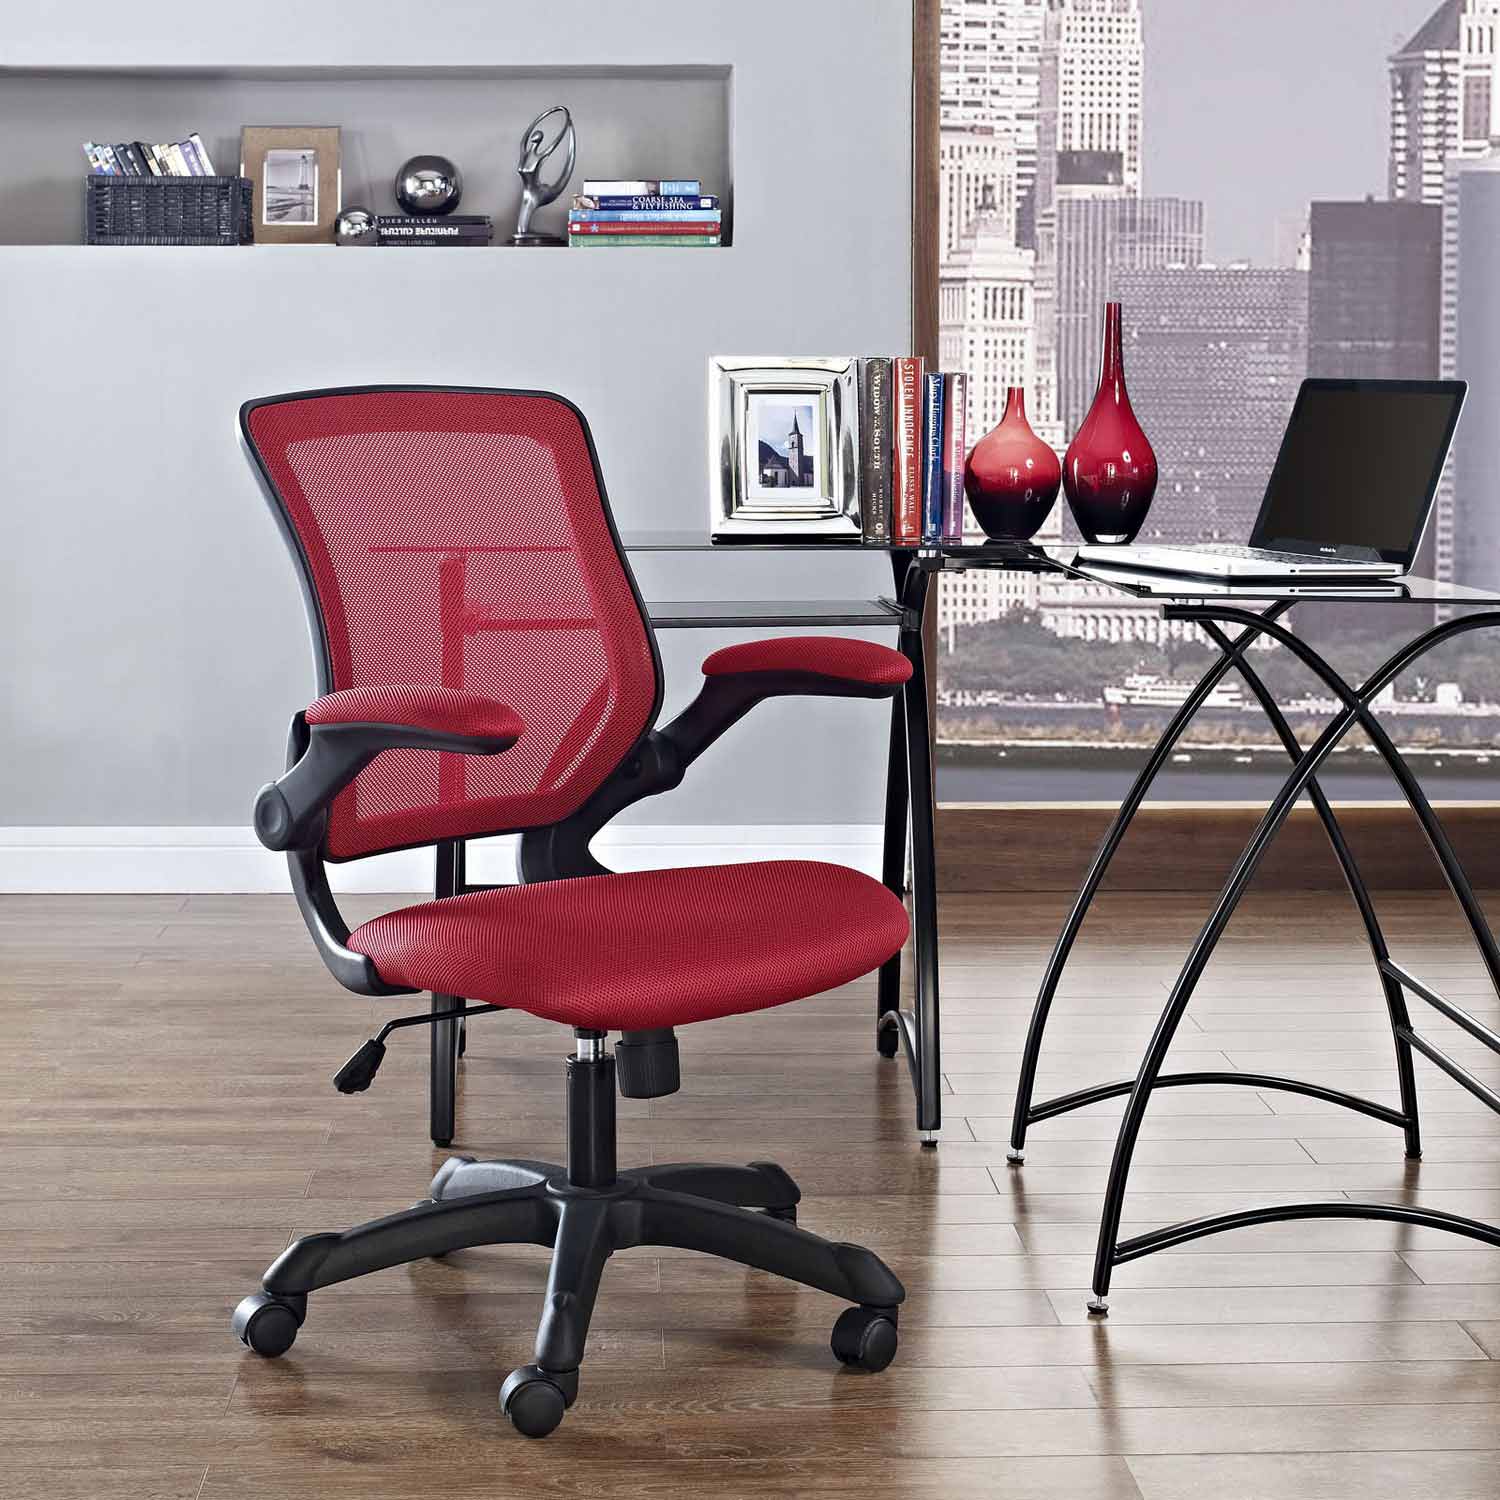 Modway Veer Mesh Office Chair - Red